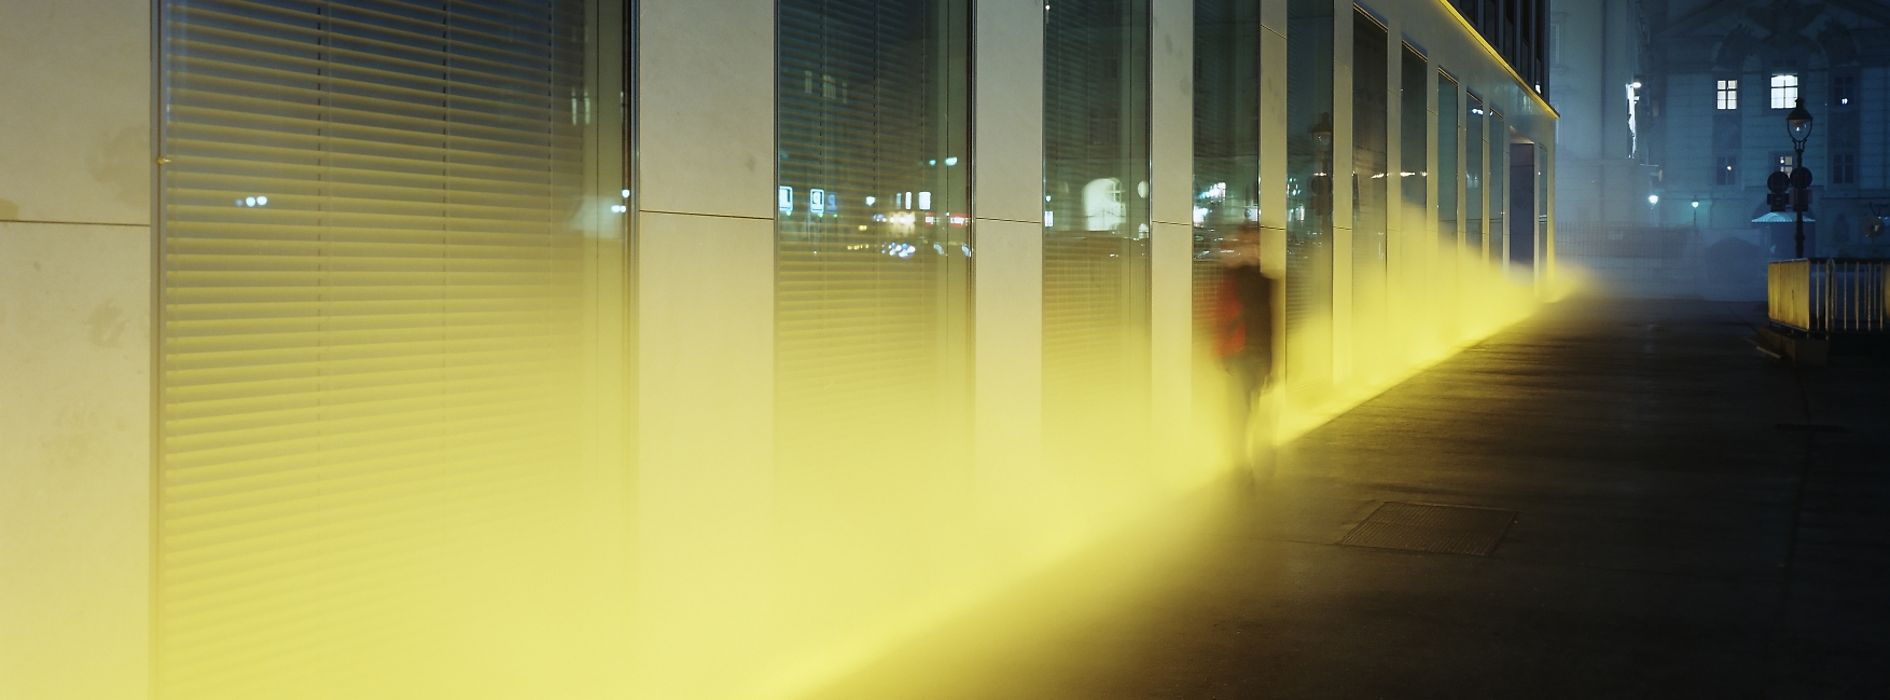 The Yellow Fog light spectacle at the headquarters of Verbund in Am Hof.